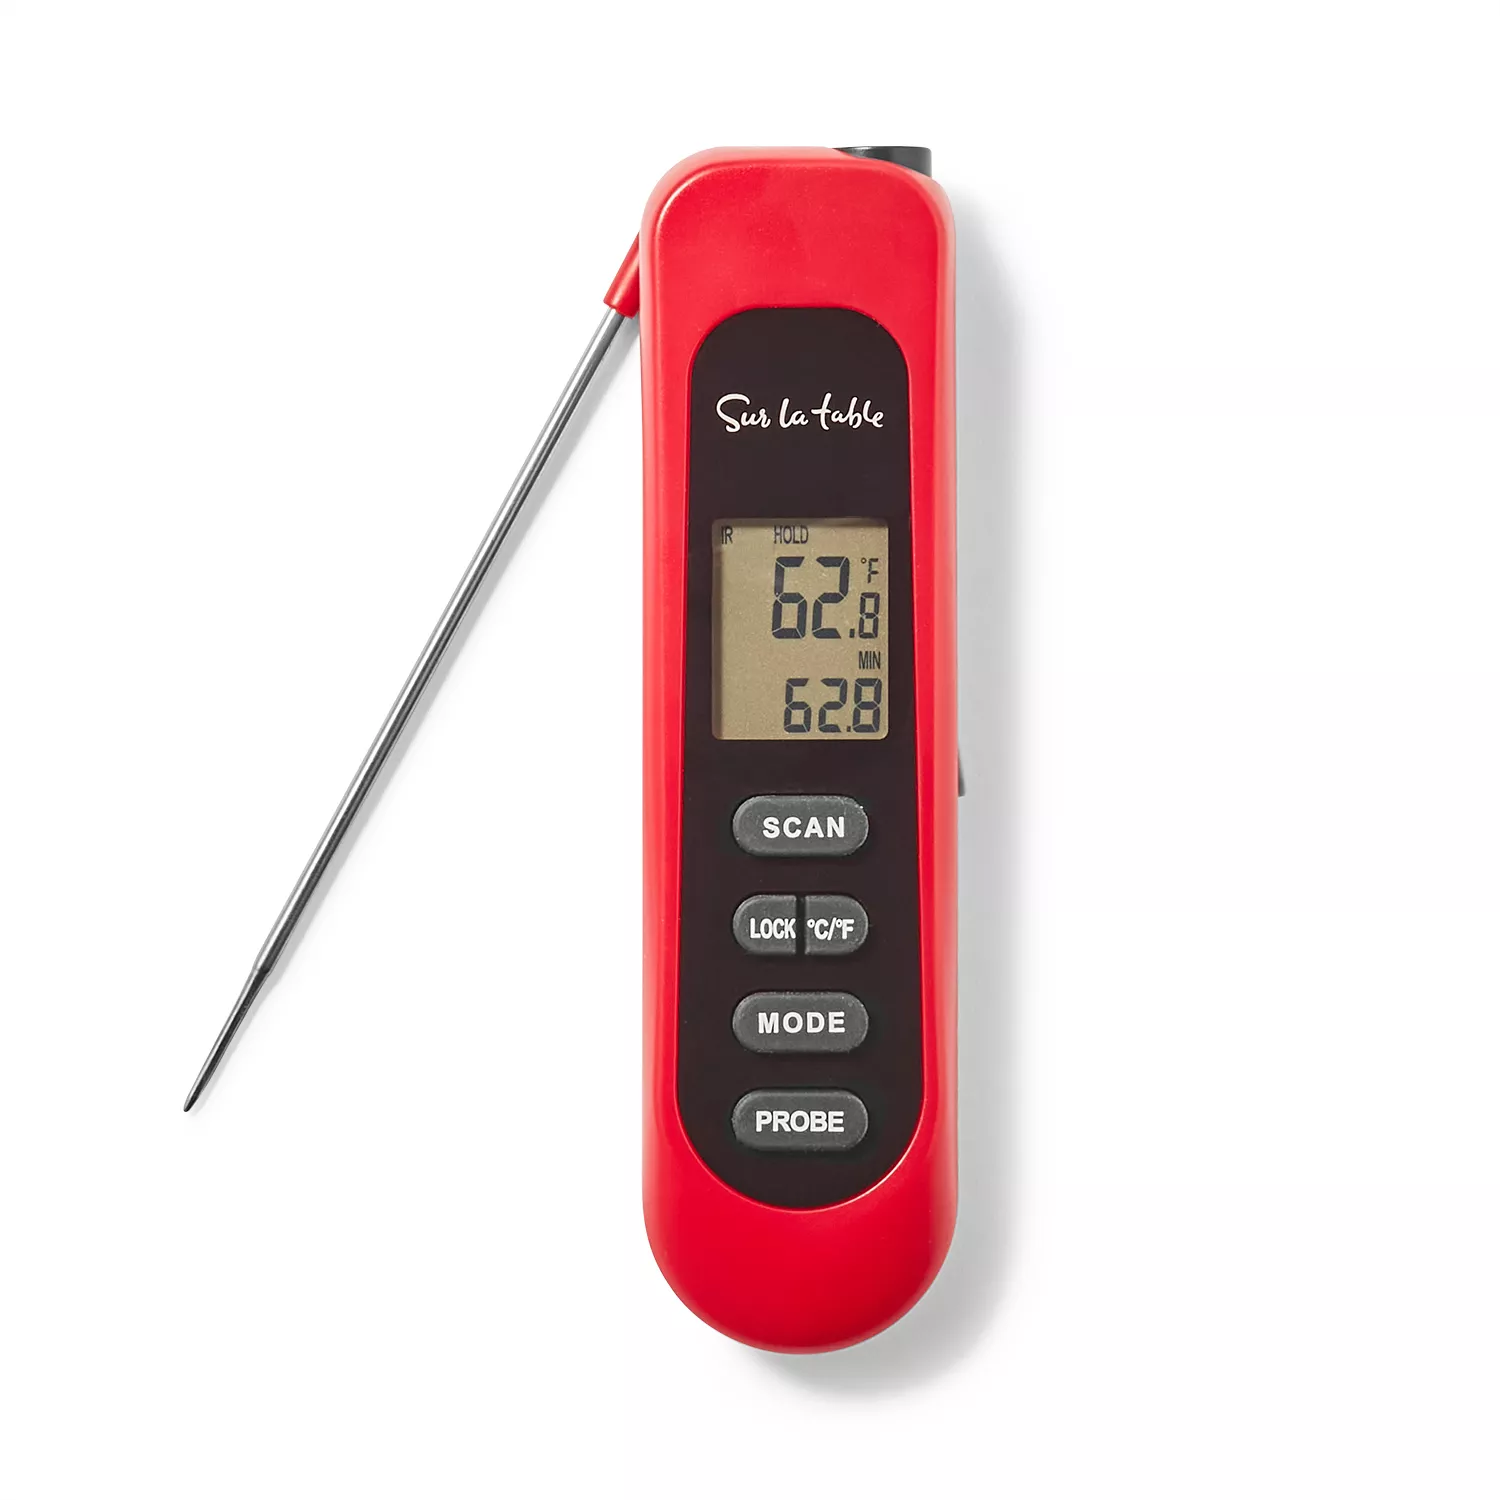 Taylor Max-Min T/R Magnet Reset Thermometer